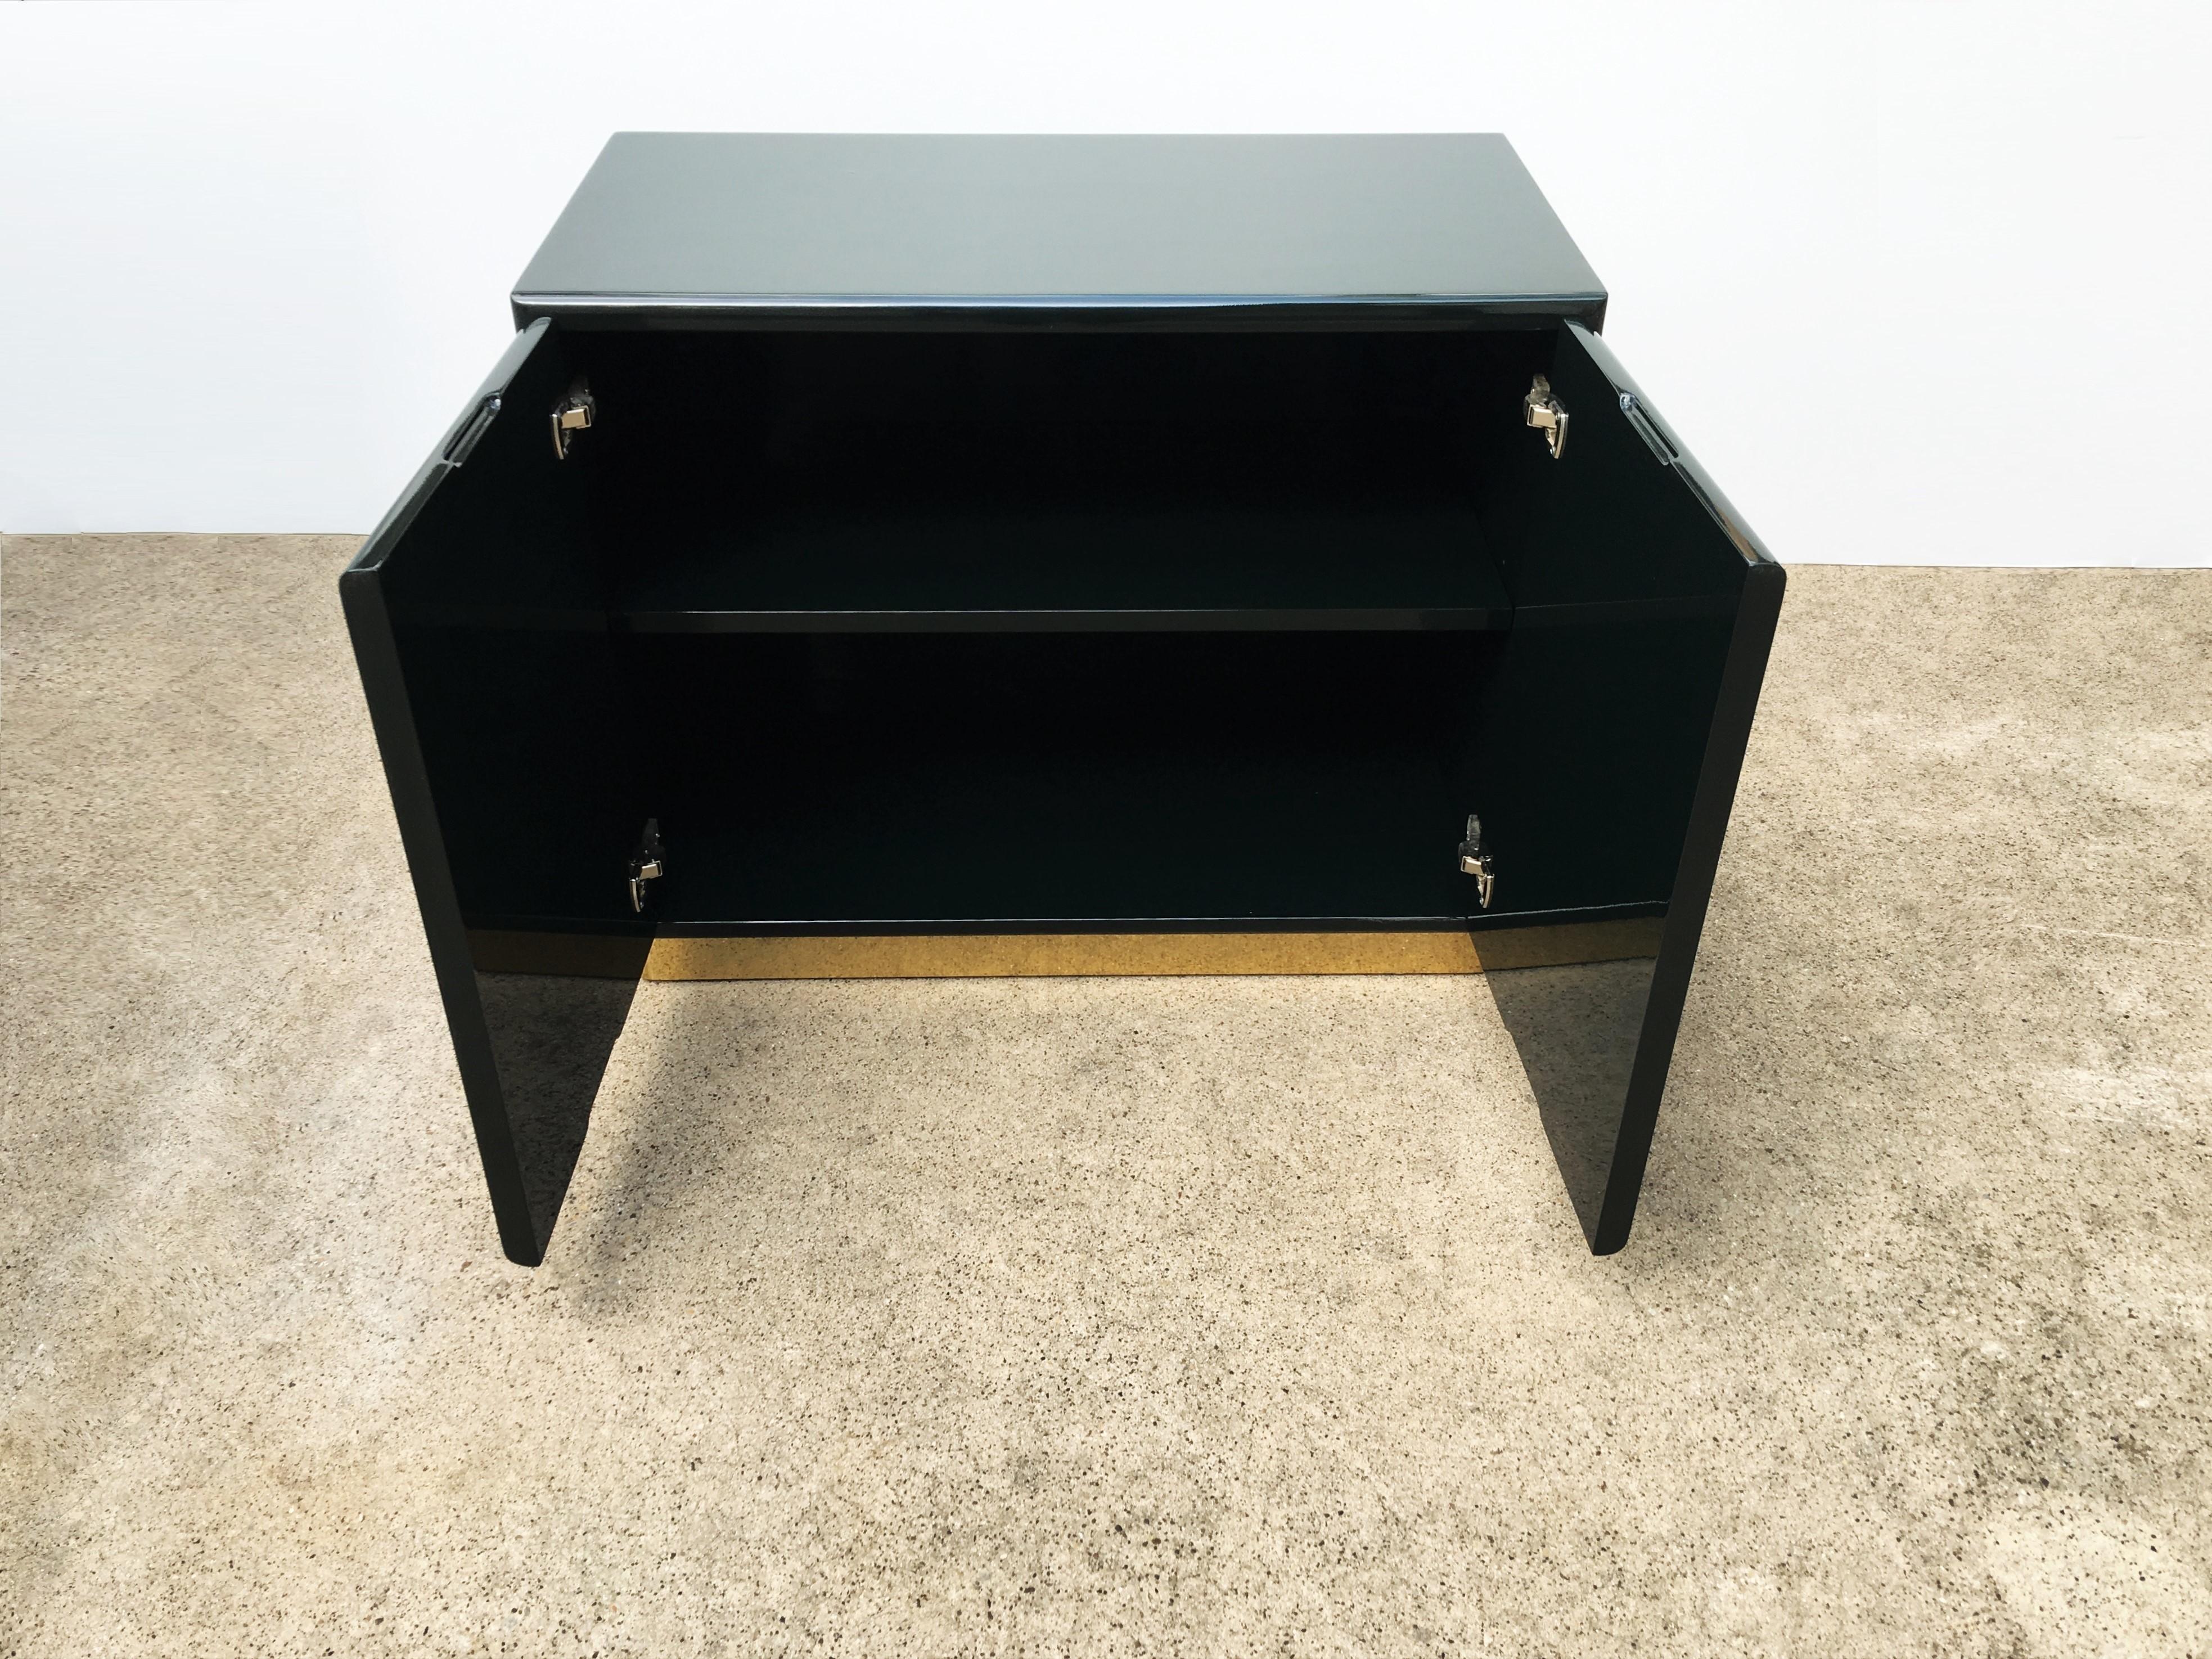 Green Lacquered Cabinets or Nightstands by Milo Baughman for Thayer Coggin 1